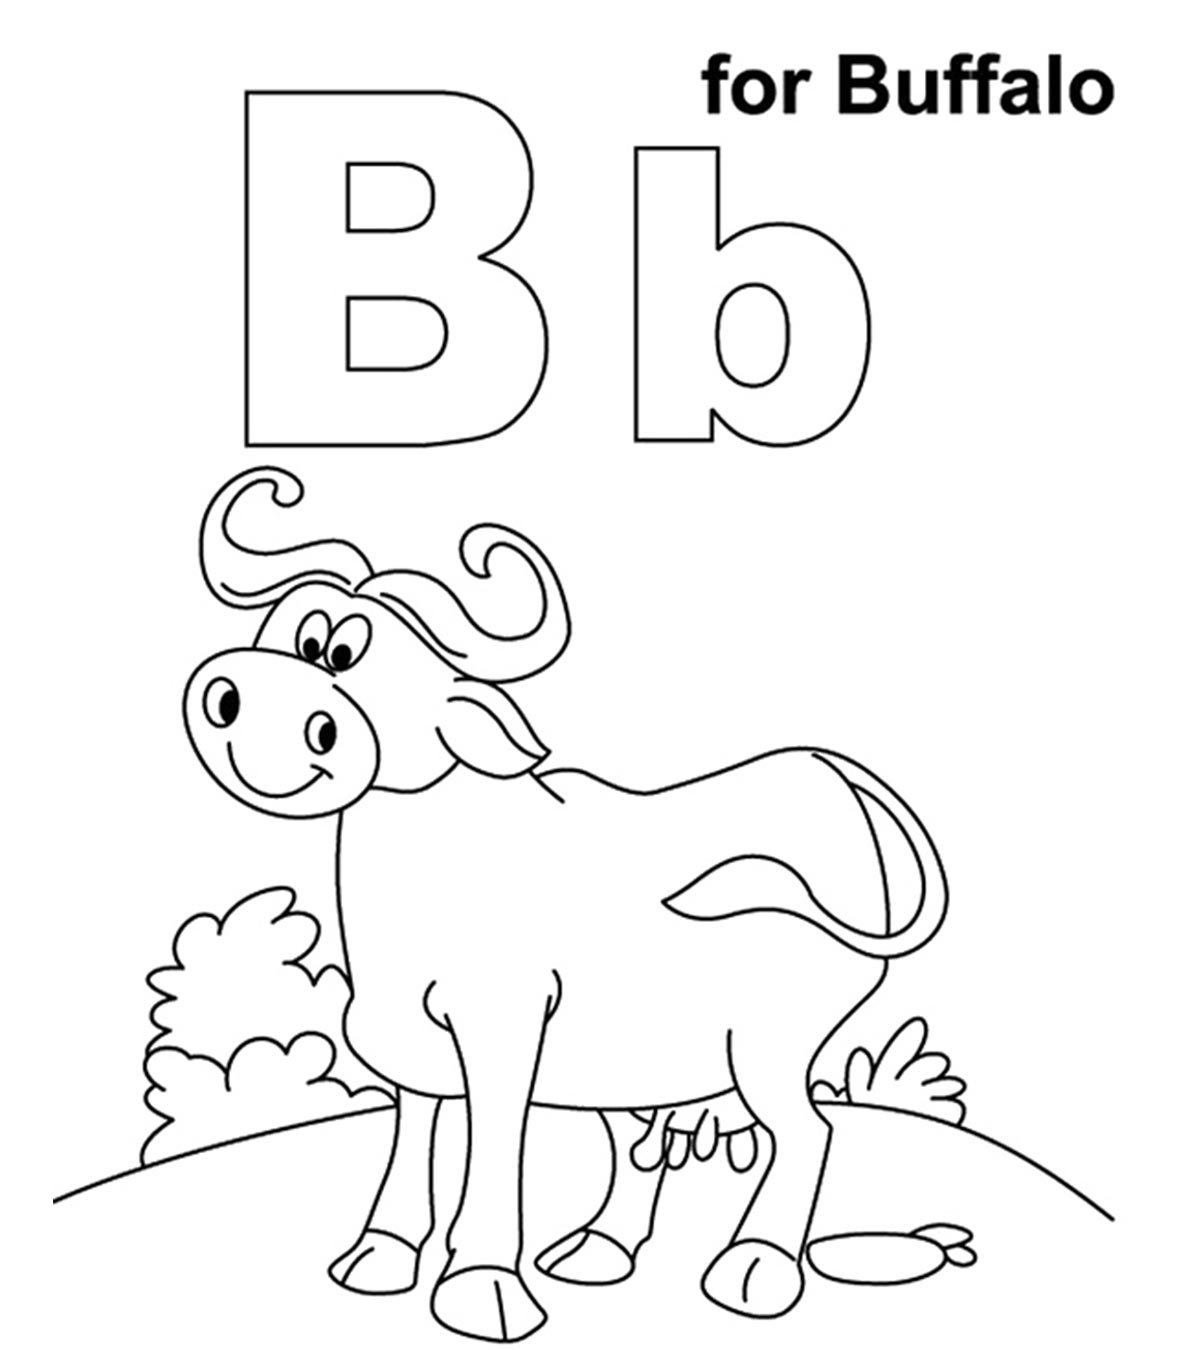 Top 10 Buffalo Coloring Pages For Your Little Ones_image